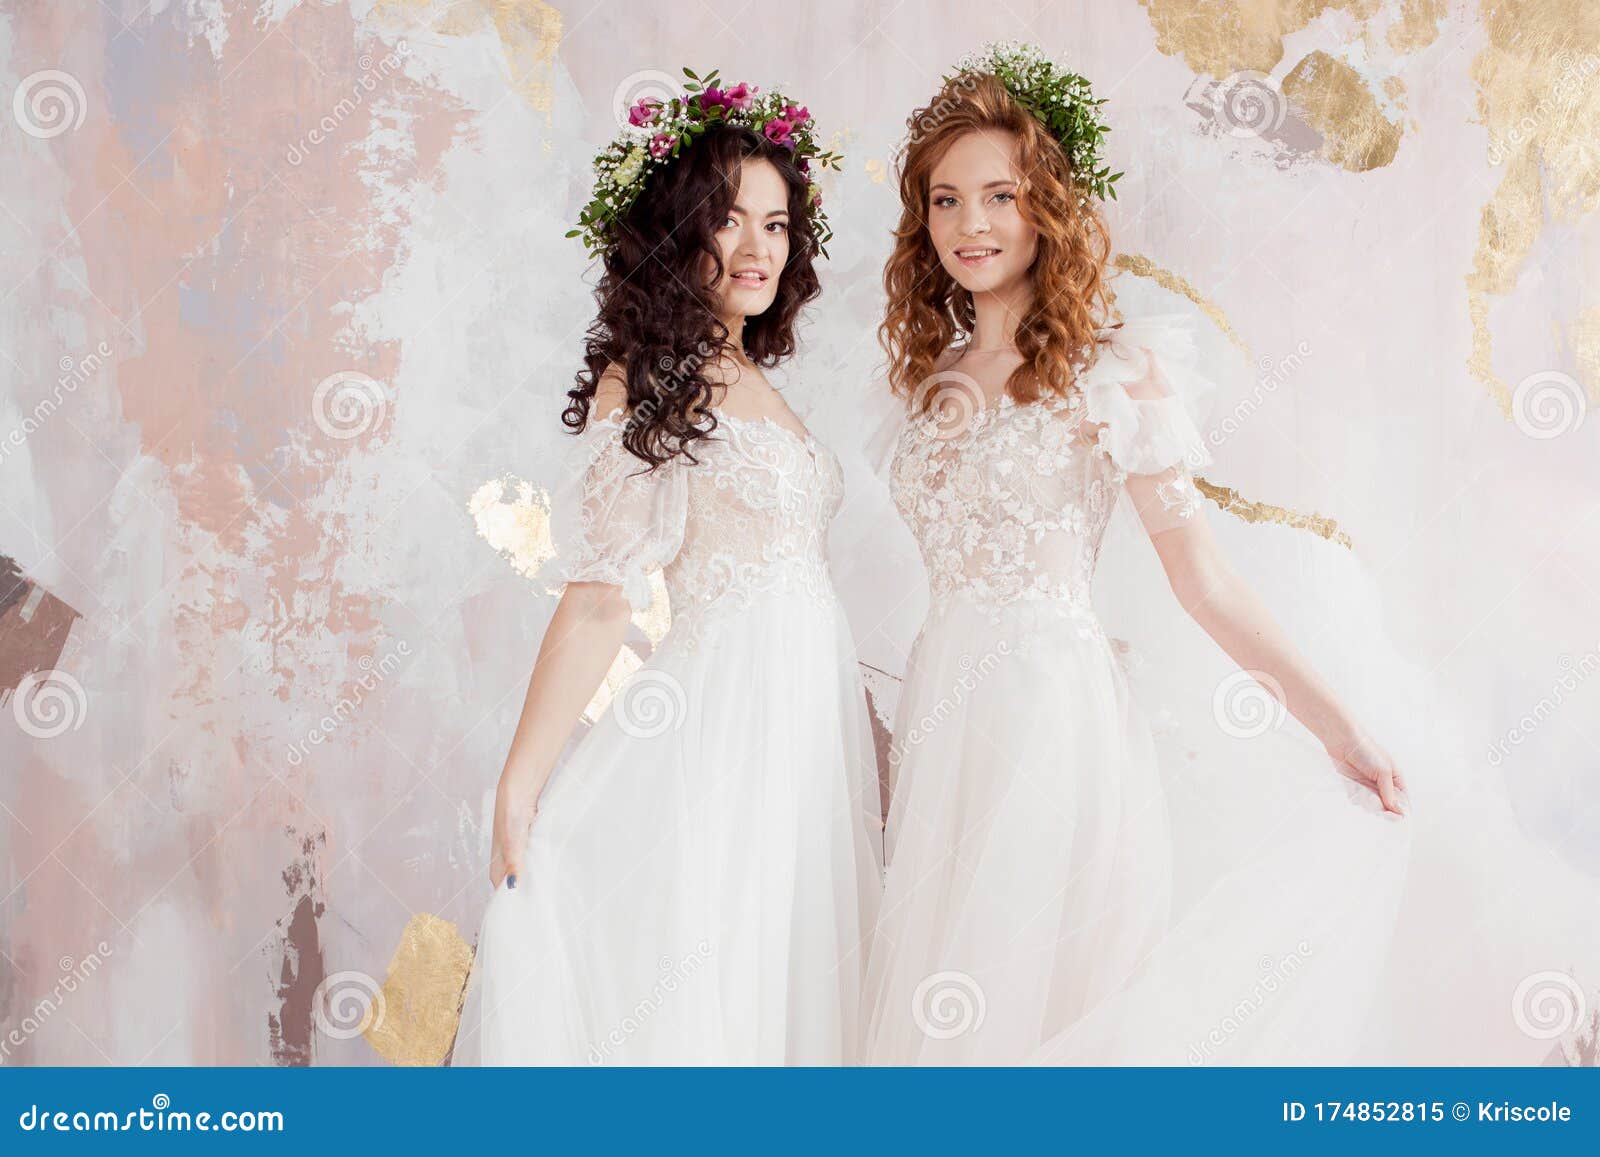 Two Charming Brides In Beautiful Spring Wreaths On Their Heads ...